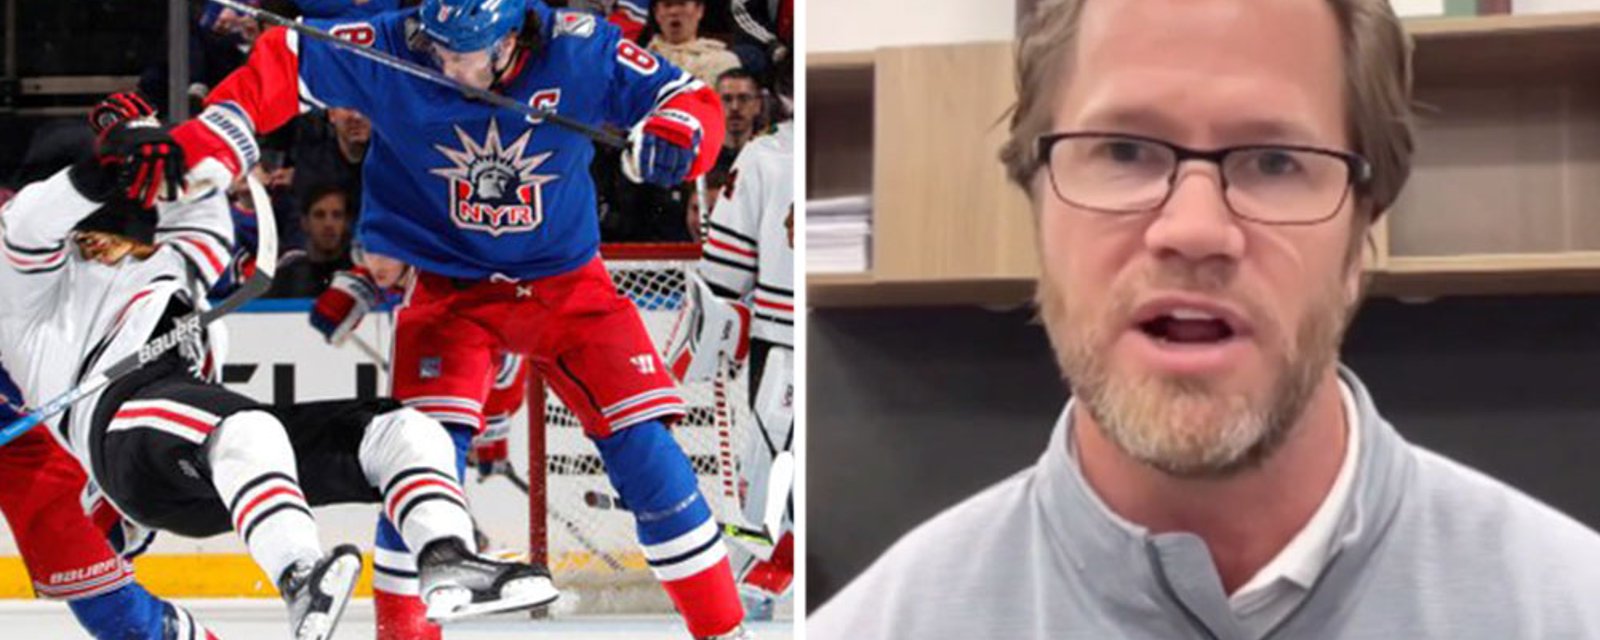 Chris Pronger calls out soft hockey fans who railed against Trouba